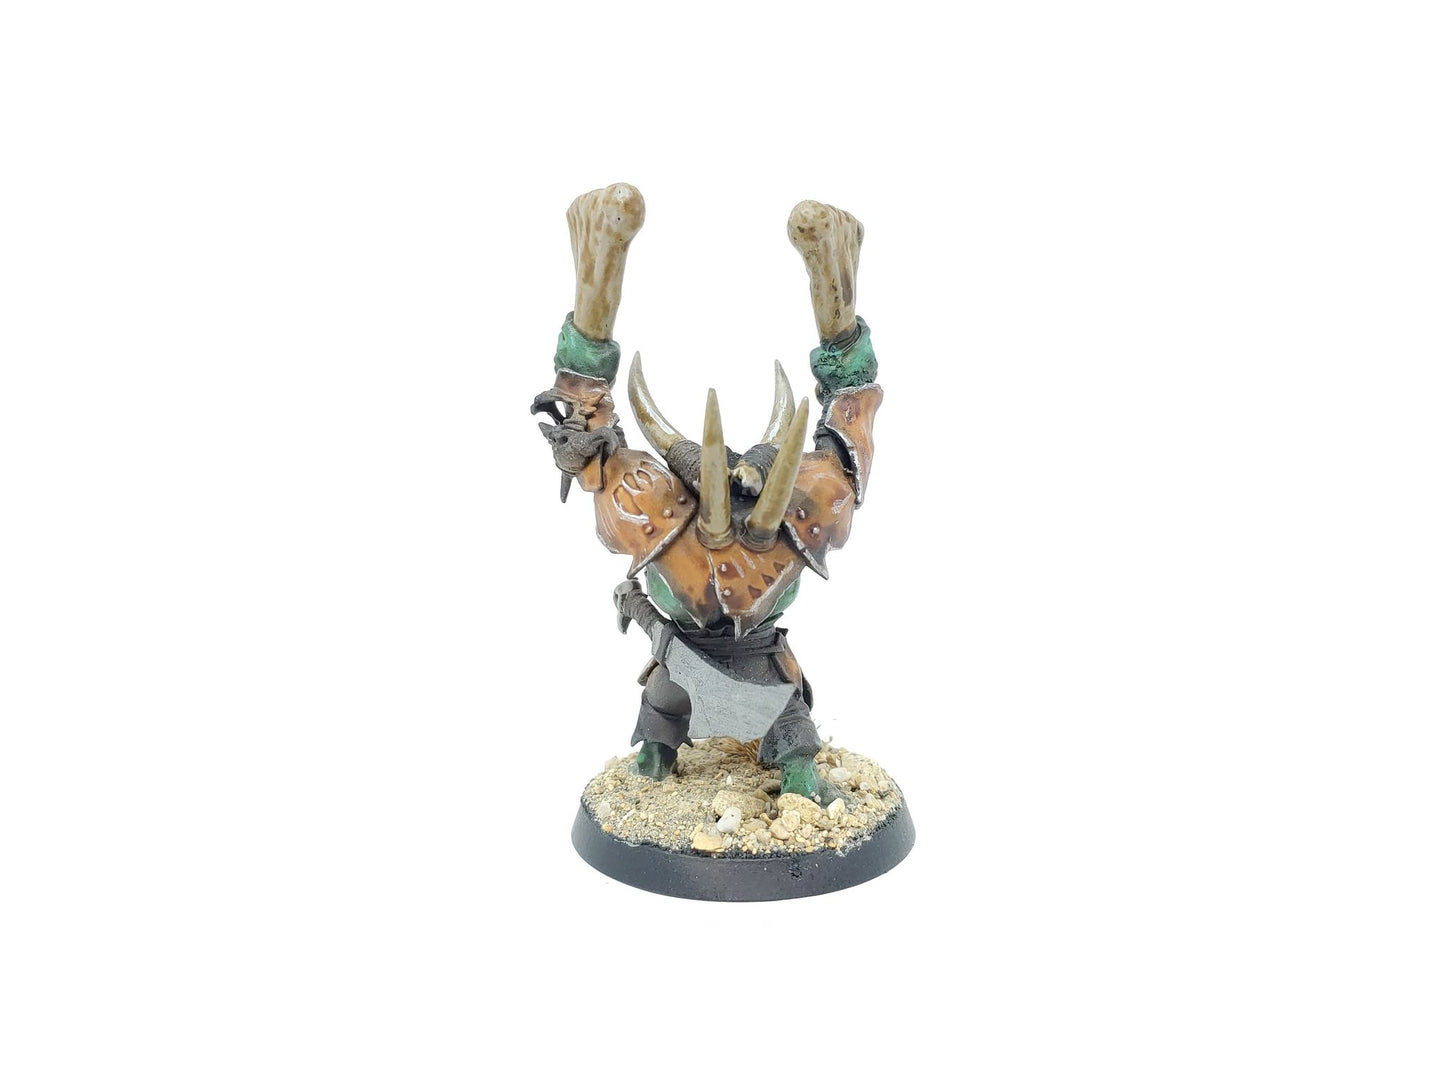 Warhammer Age of Sigmar: Warchanter (Well Painted)